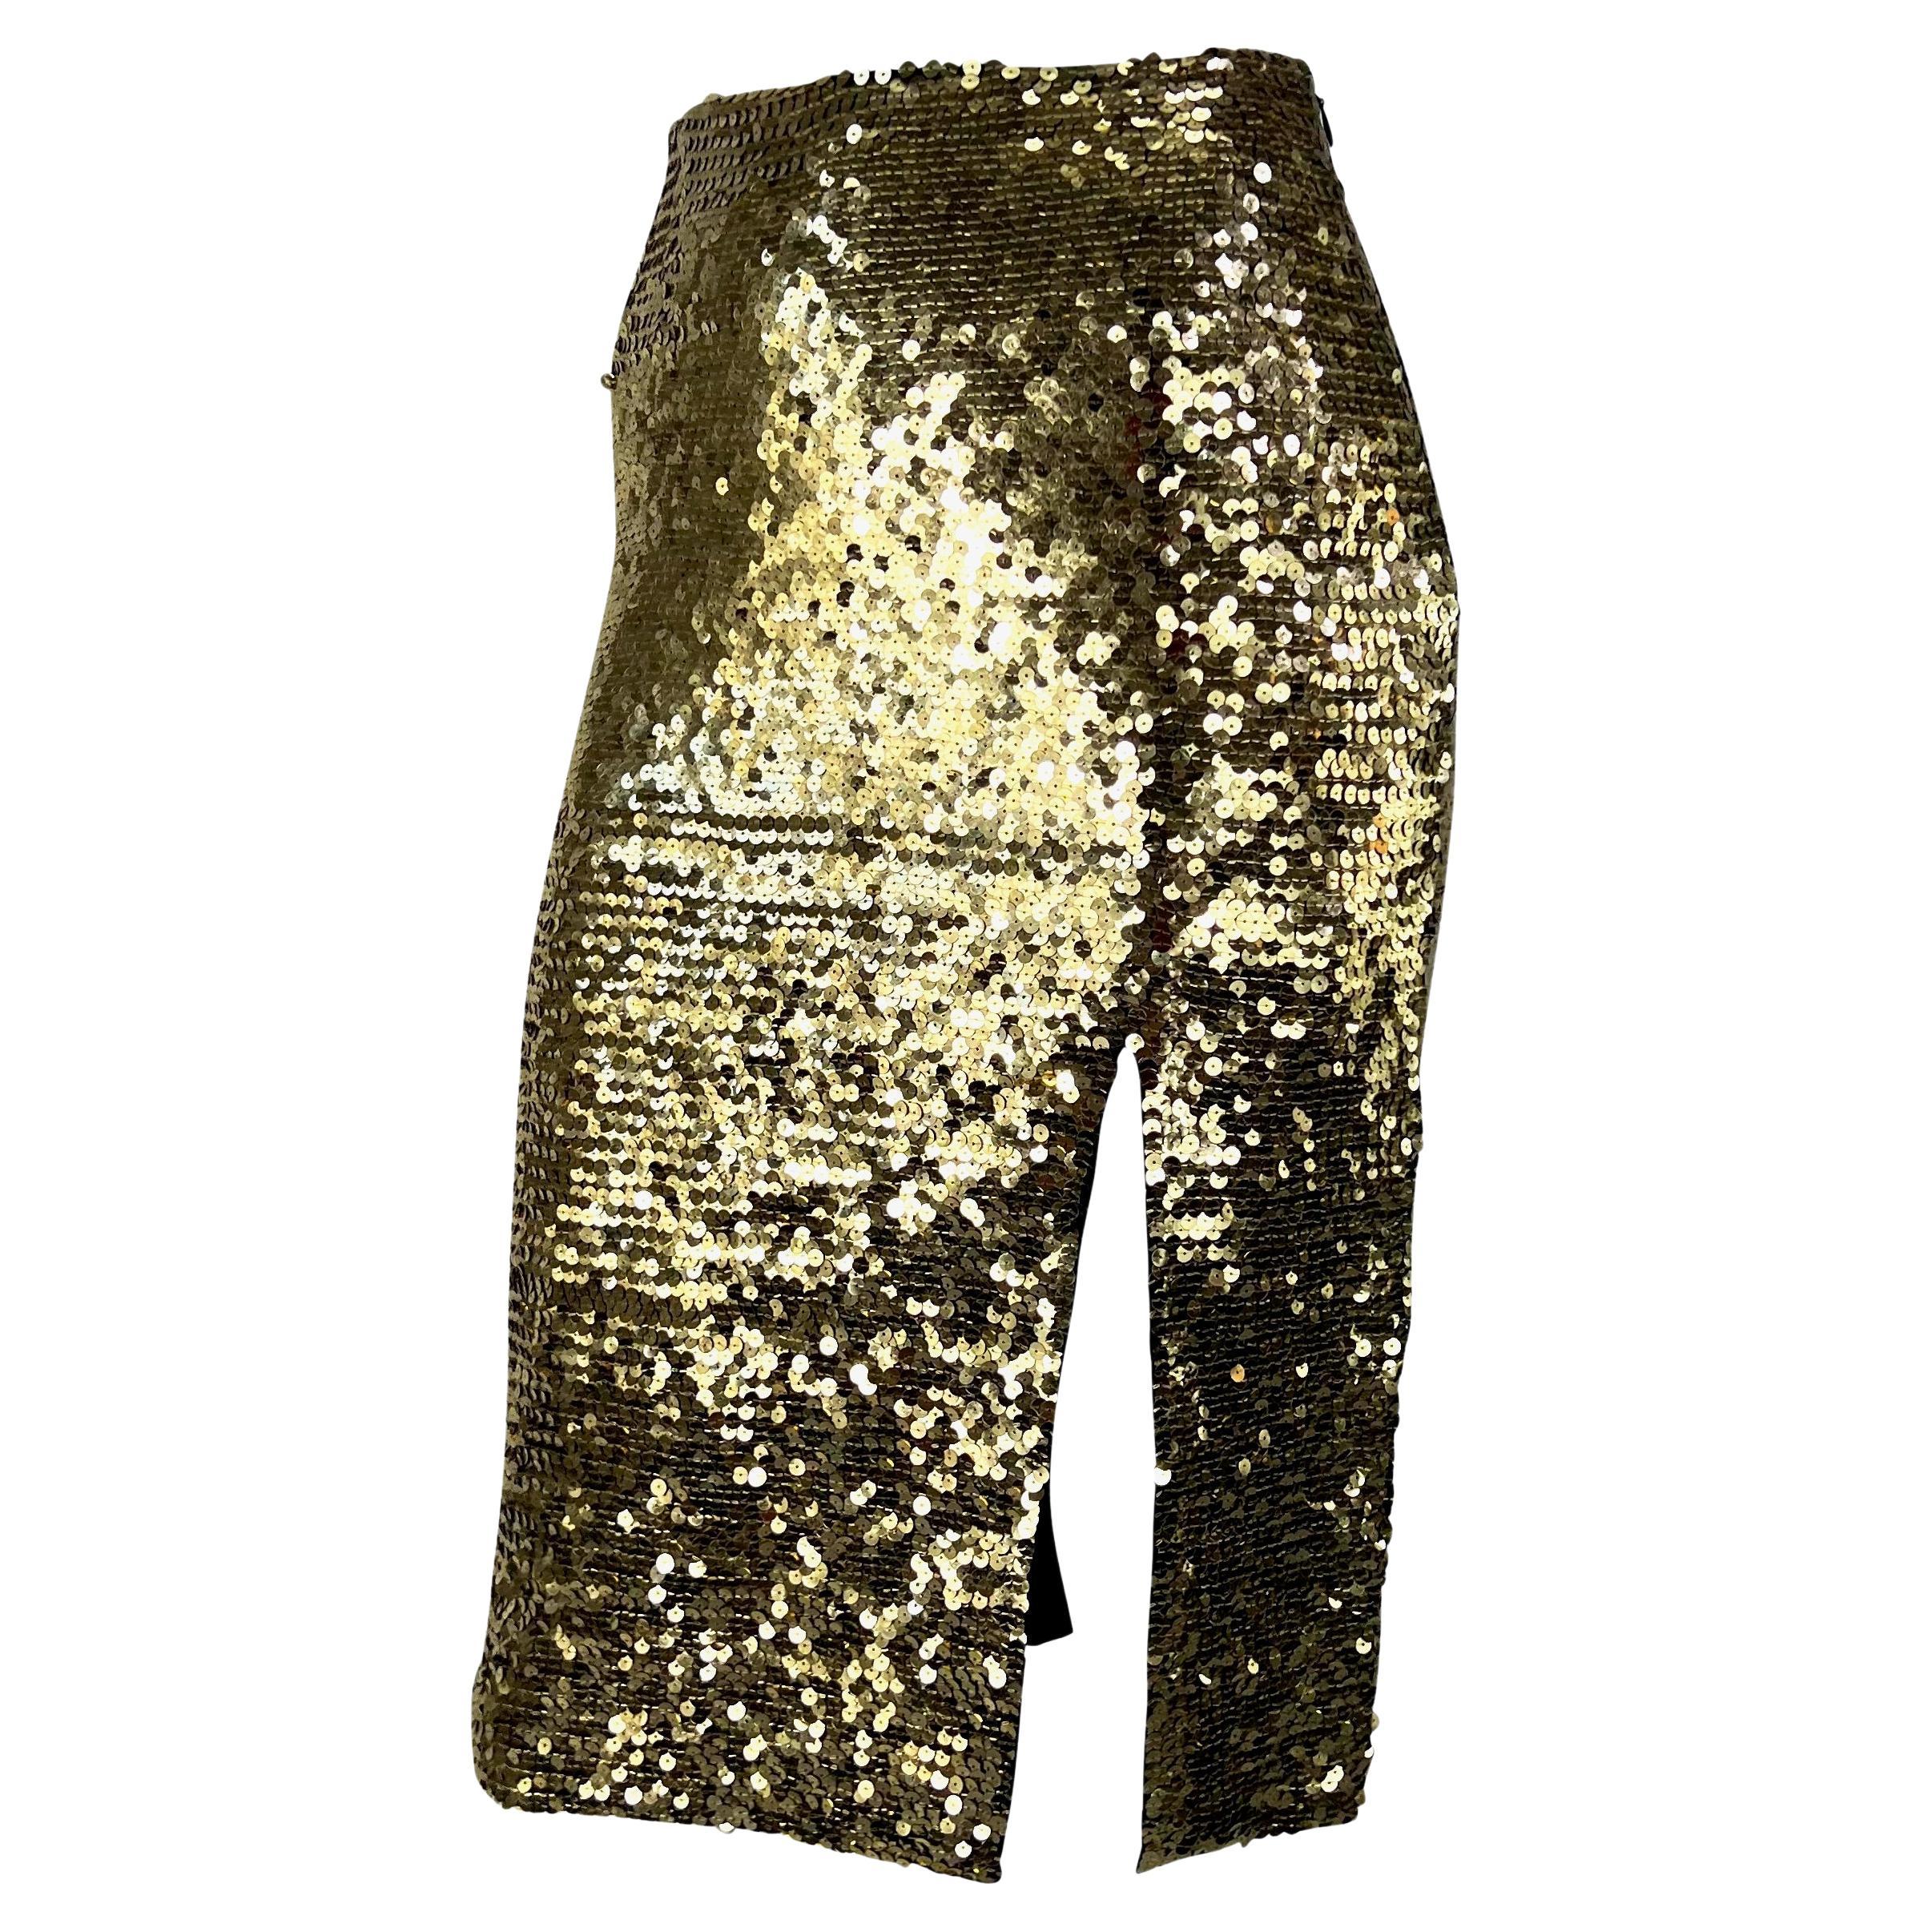 Presenting a stunning gold sequin John Galliano skirt. This fabulous pencil skirt is covered in sequins that perfectly catch the light. The skirt is made complete with a large slit at the front. Add this sparkly gem to your wardrobe! 

Approximate